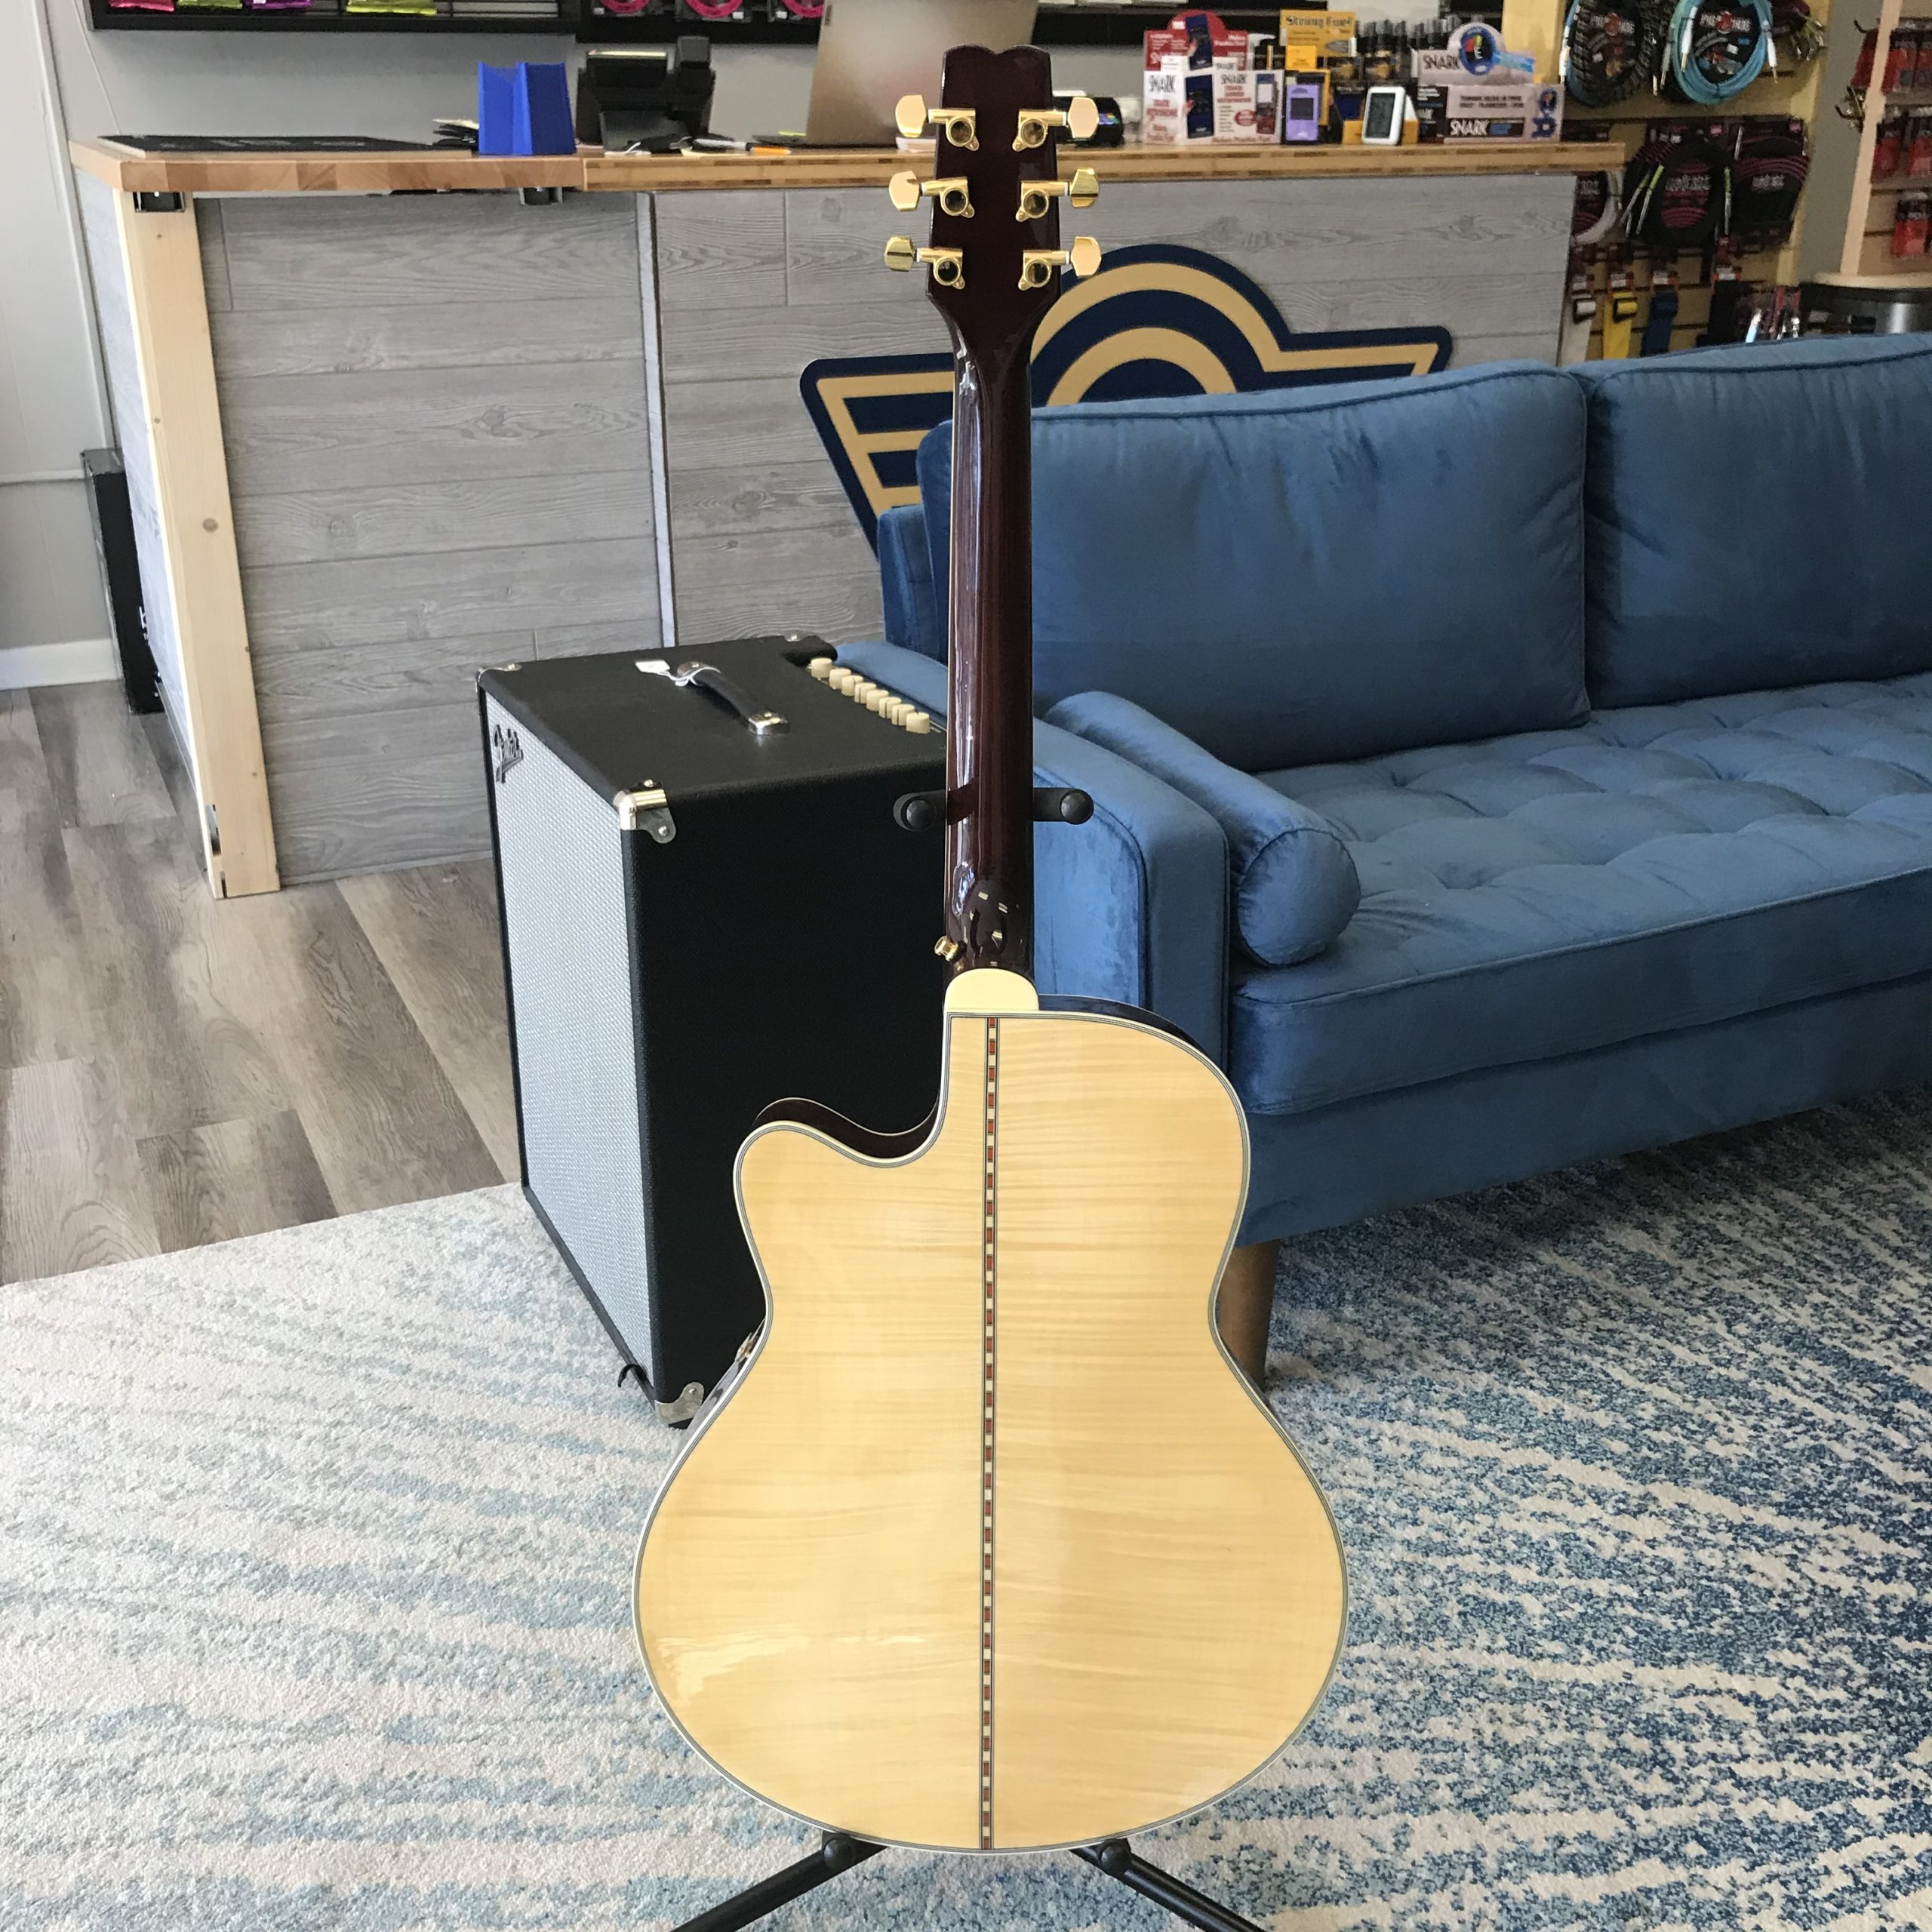 Picture of a GuitarWorks Hollow bodied guitar